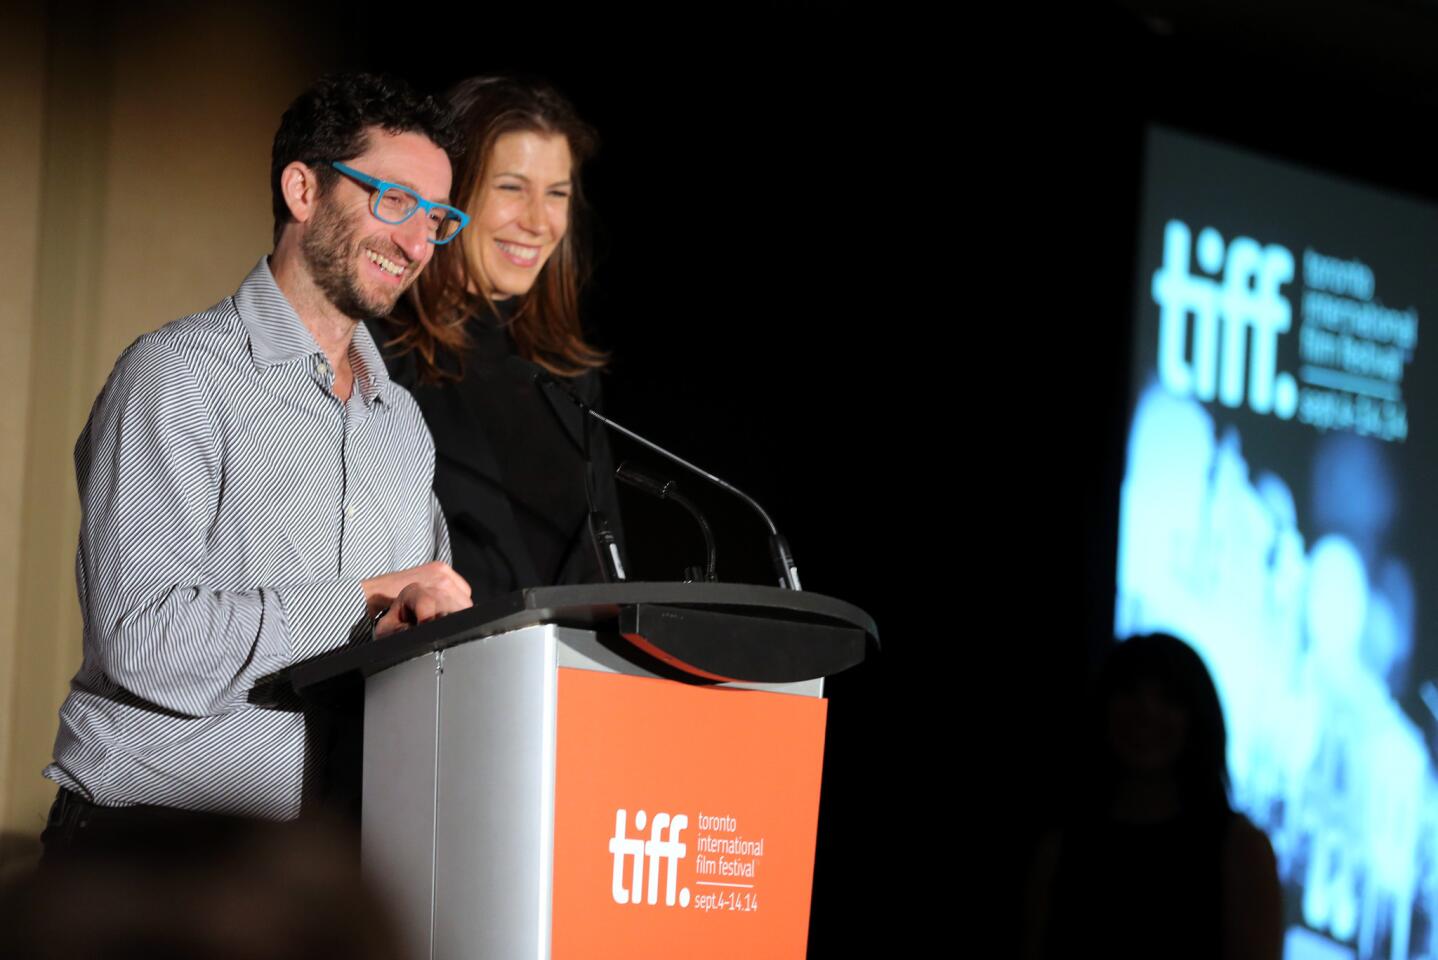 Executive Noah Segal and Laurie May accept the Grolsch People's Choice Award on behalf of "The Imitation Game" during the TIFF Awards Brunch at Intercontinental Hotel in Toronto.